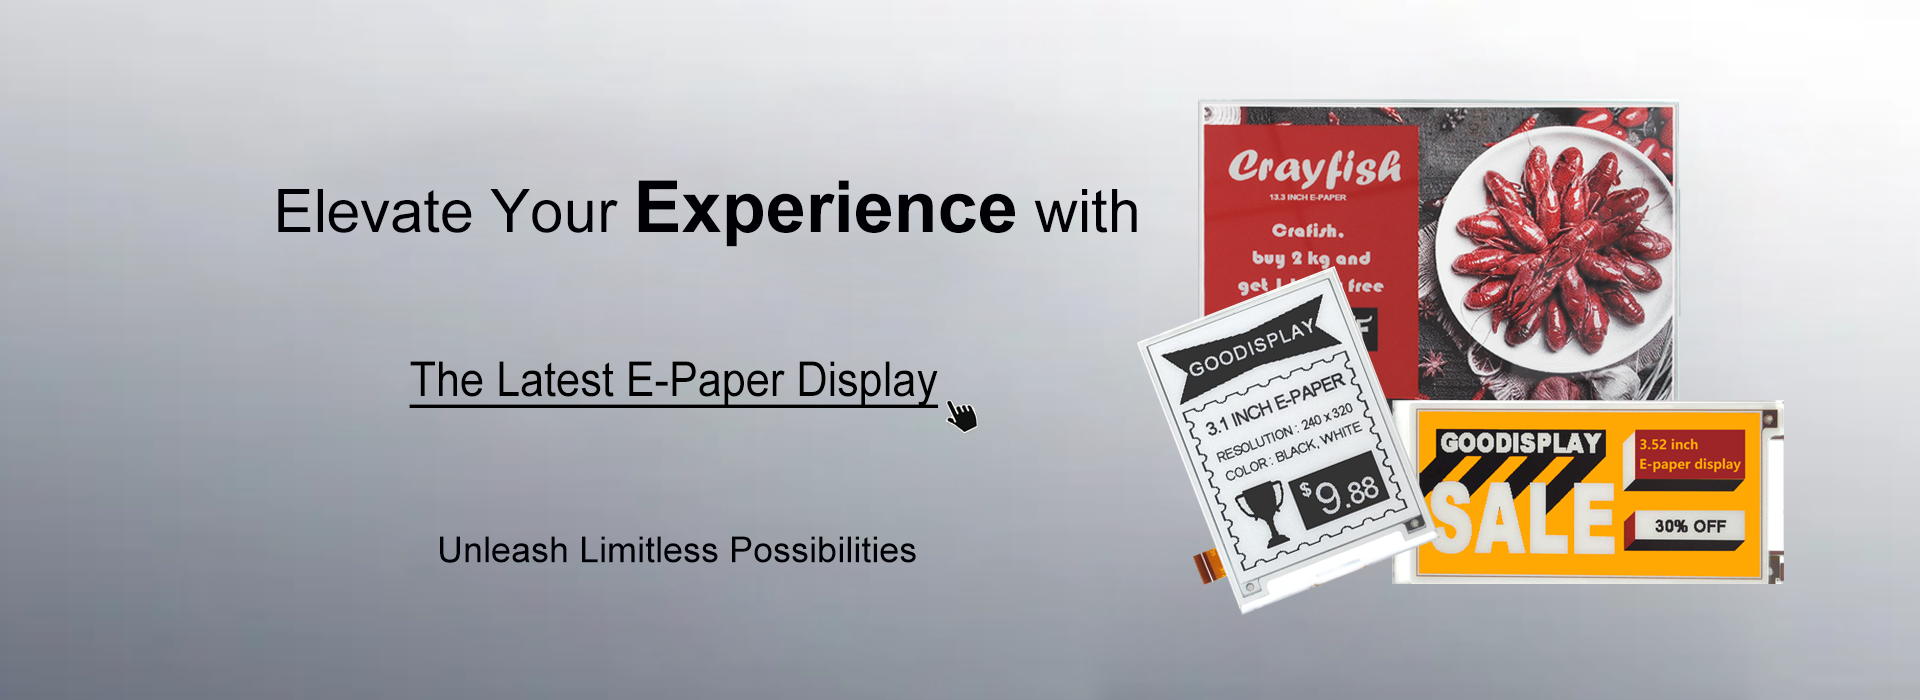 The Lasted E-Paper Display